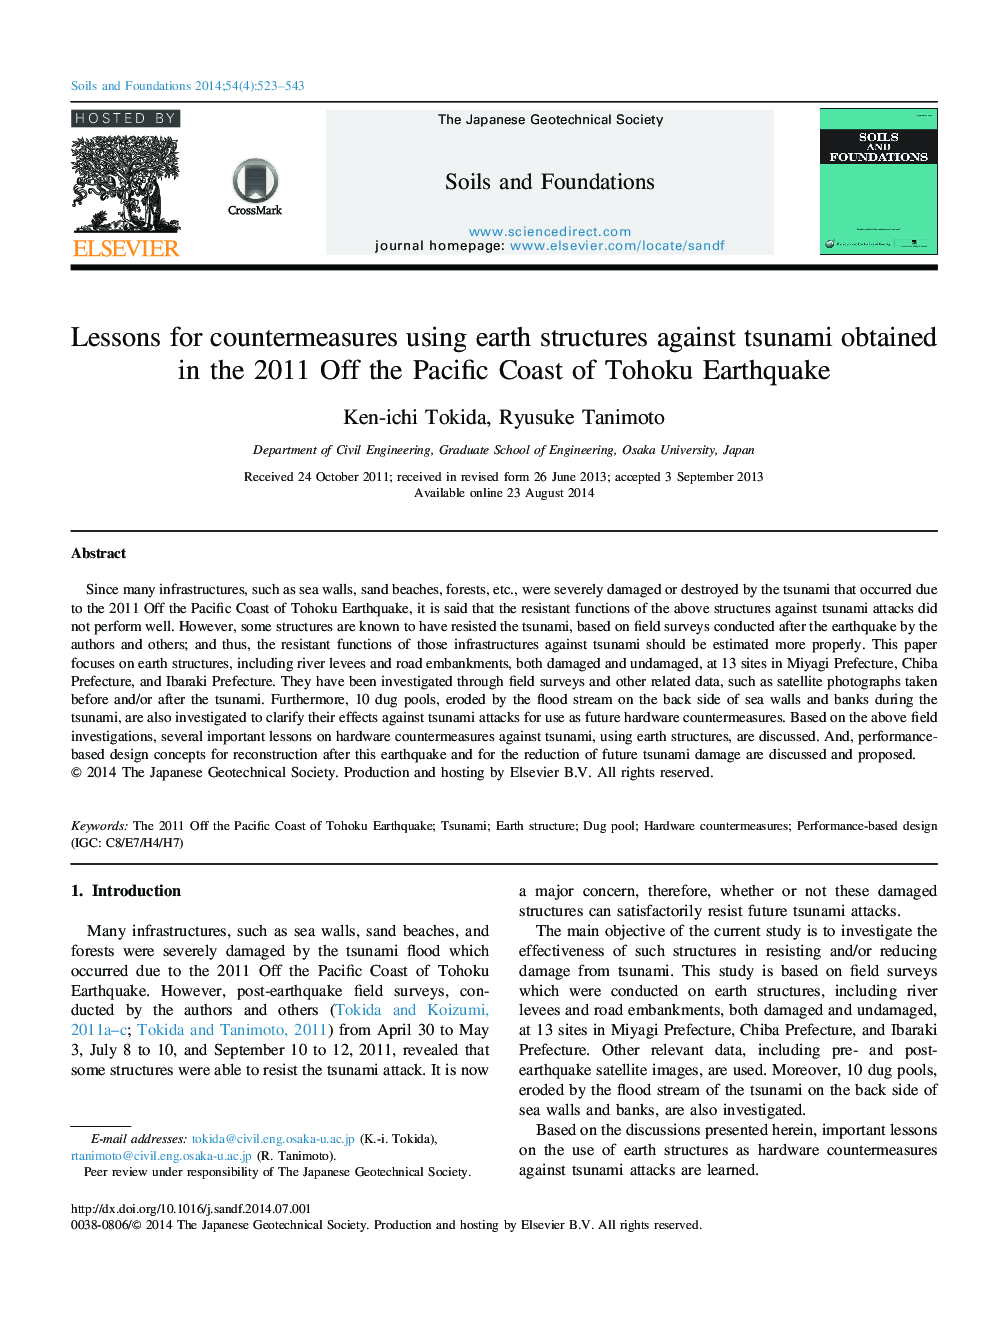 Lessons for countermeasures using earth structures against tsunami obtained in the 2011 Off the Pacific Coast of Tohoku Earthquake 